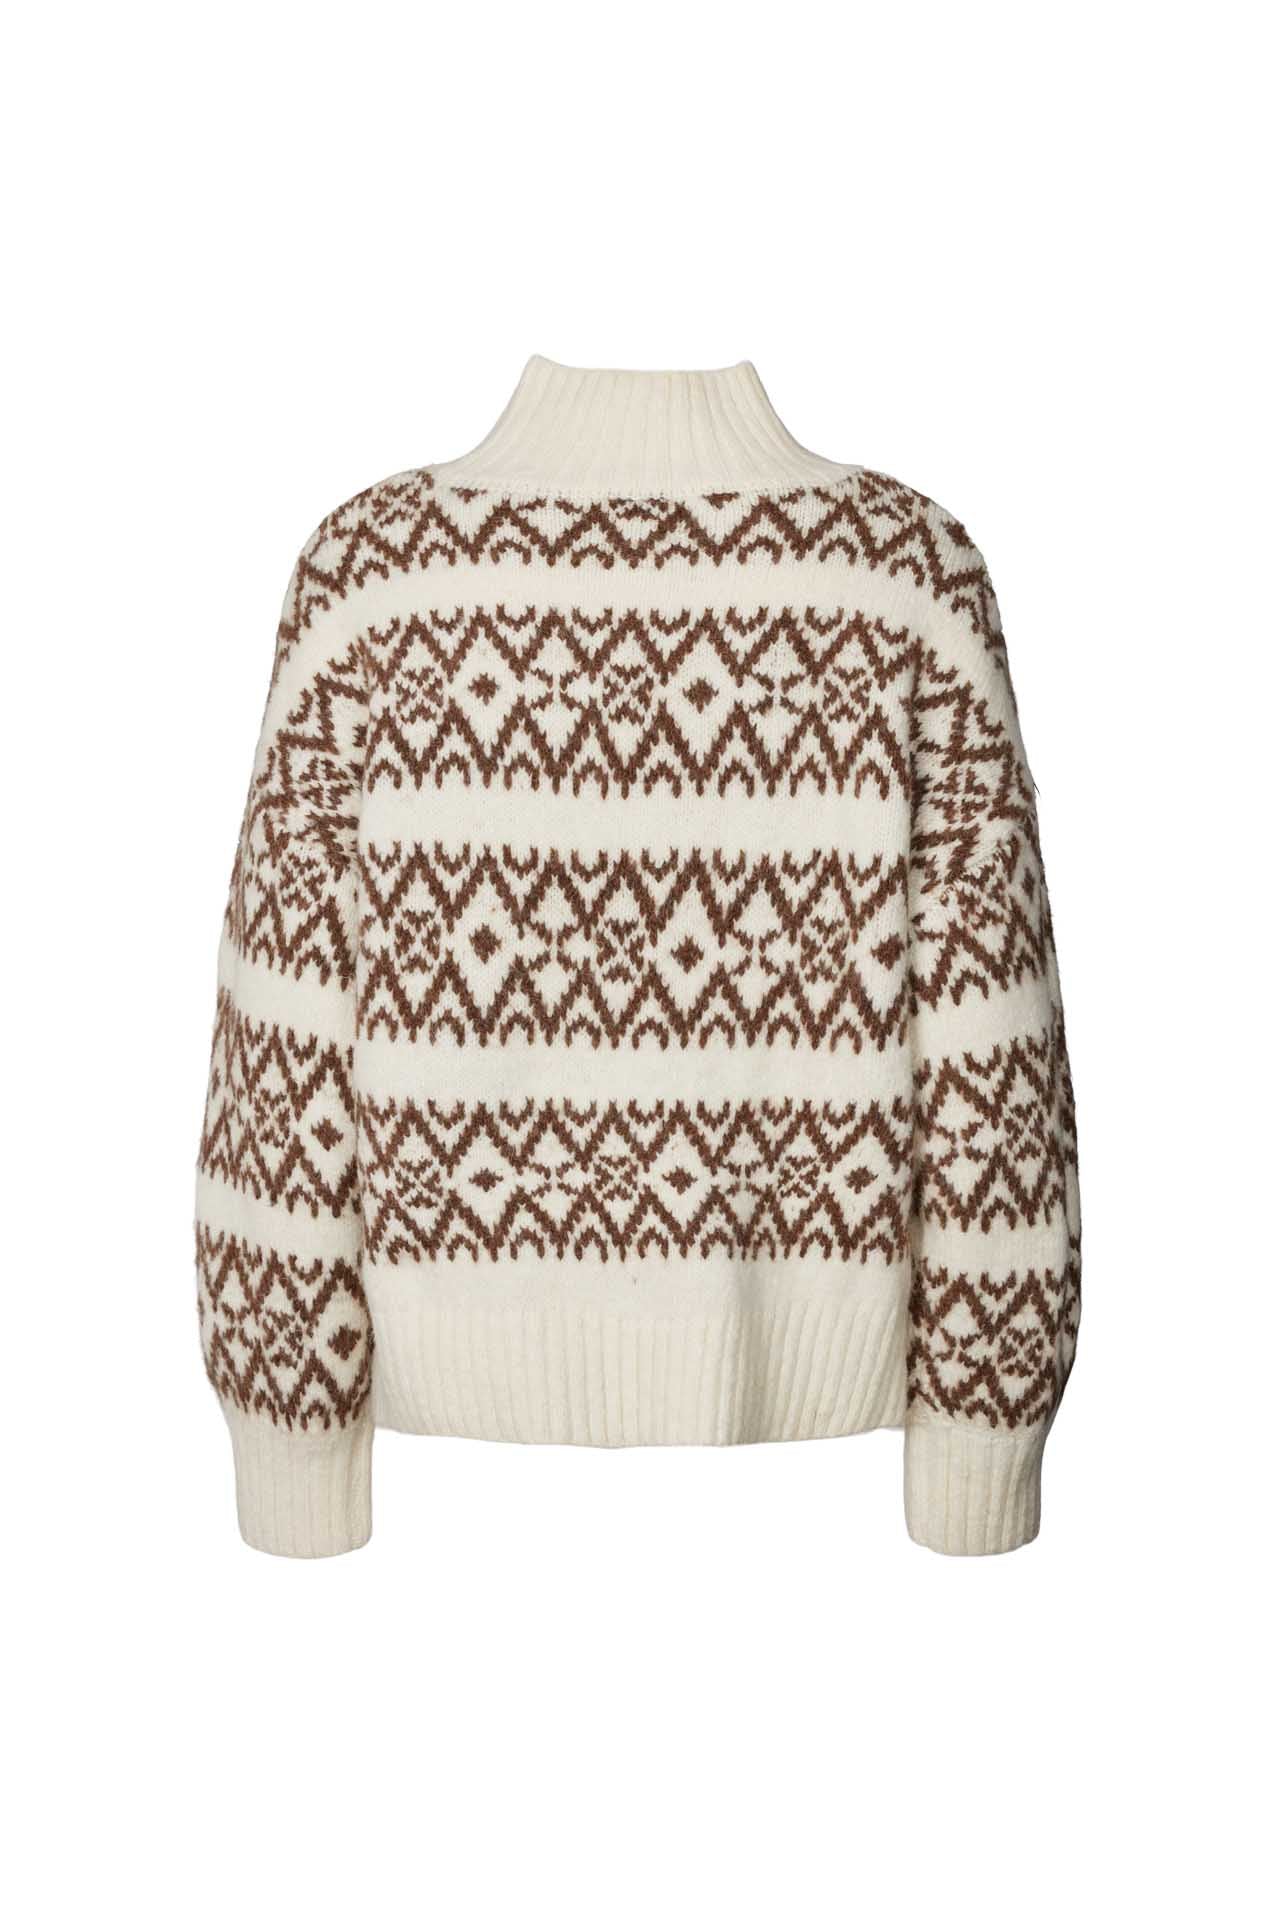 Lollys Laundry Mille Knit Jumper 02 Creme